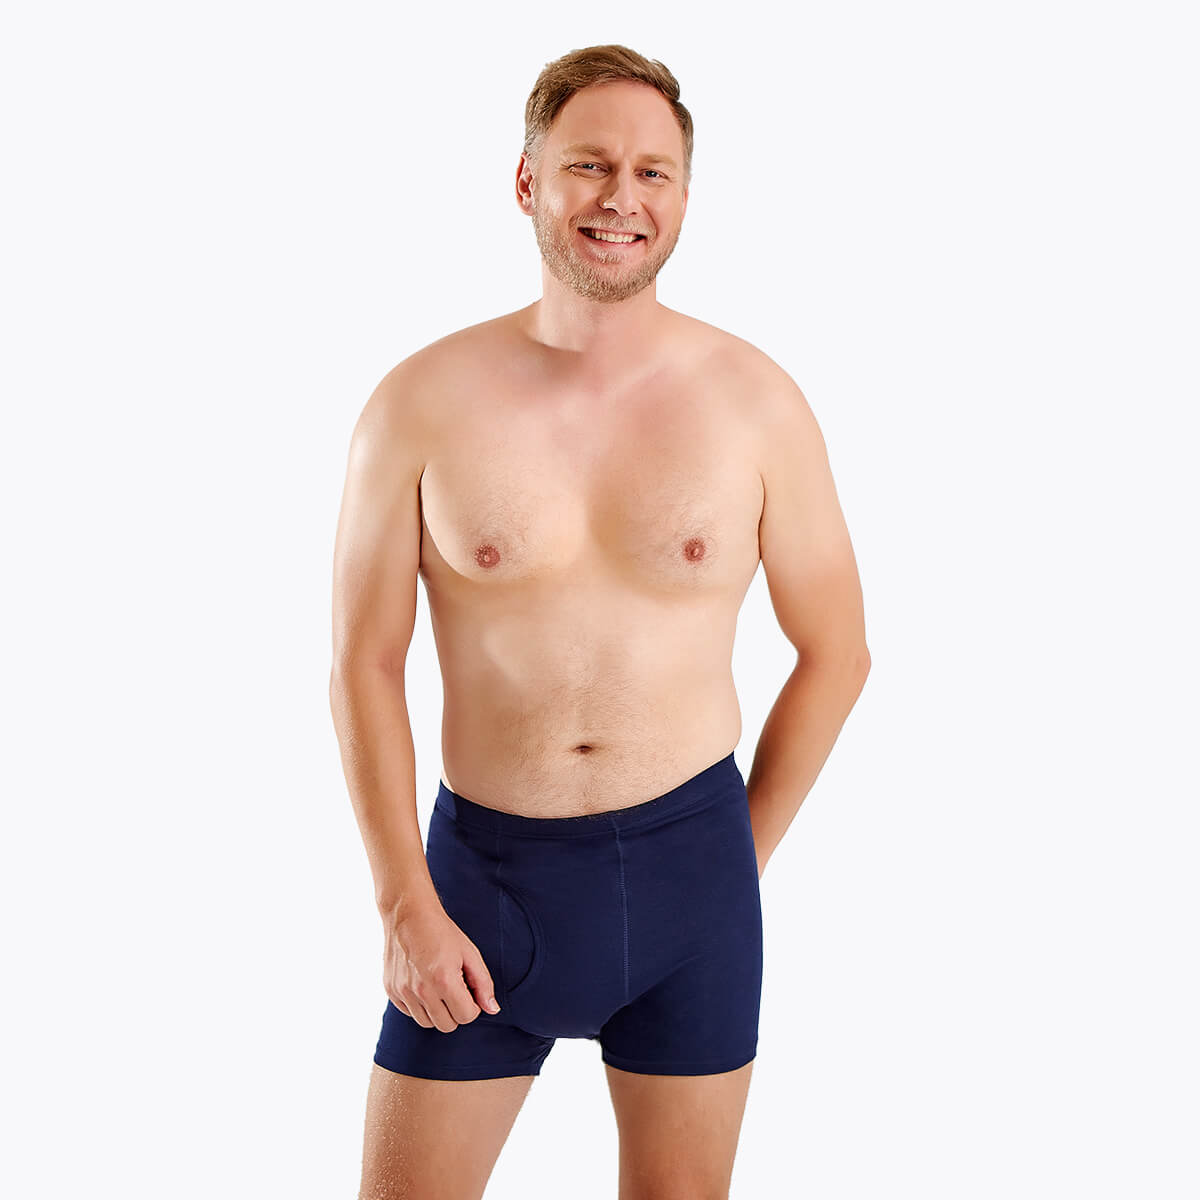 Men's Assorted Colors Reusable Incontinence Brief